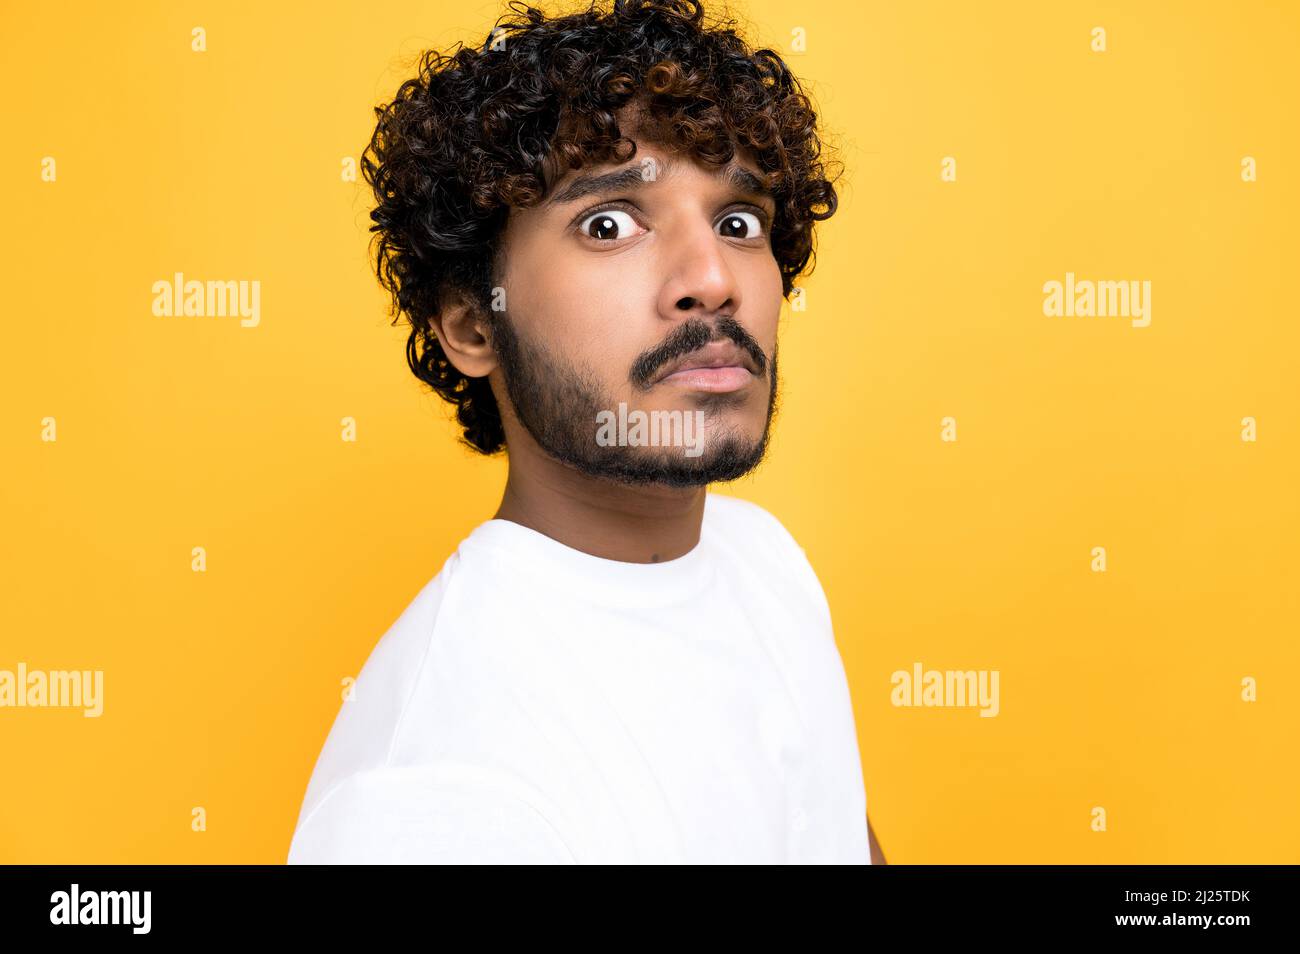 Close-up photo of a scared confused indian or arabian curly haired guy,  looking at camera in disbelief, standing over isolated orange background  wearing white t-shirt Stock Photo - Alamy